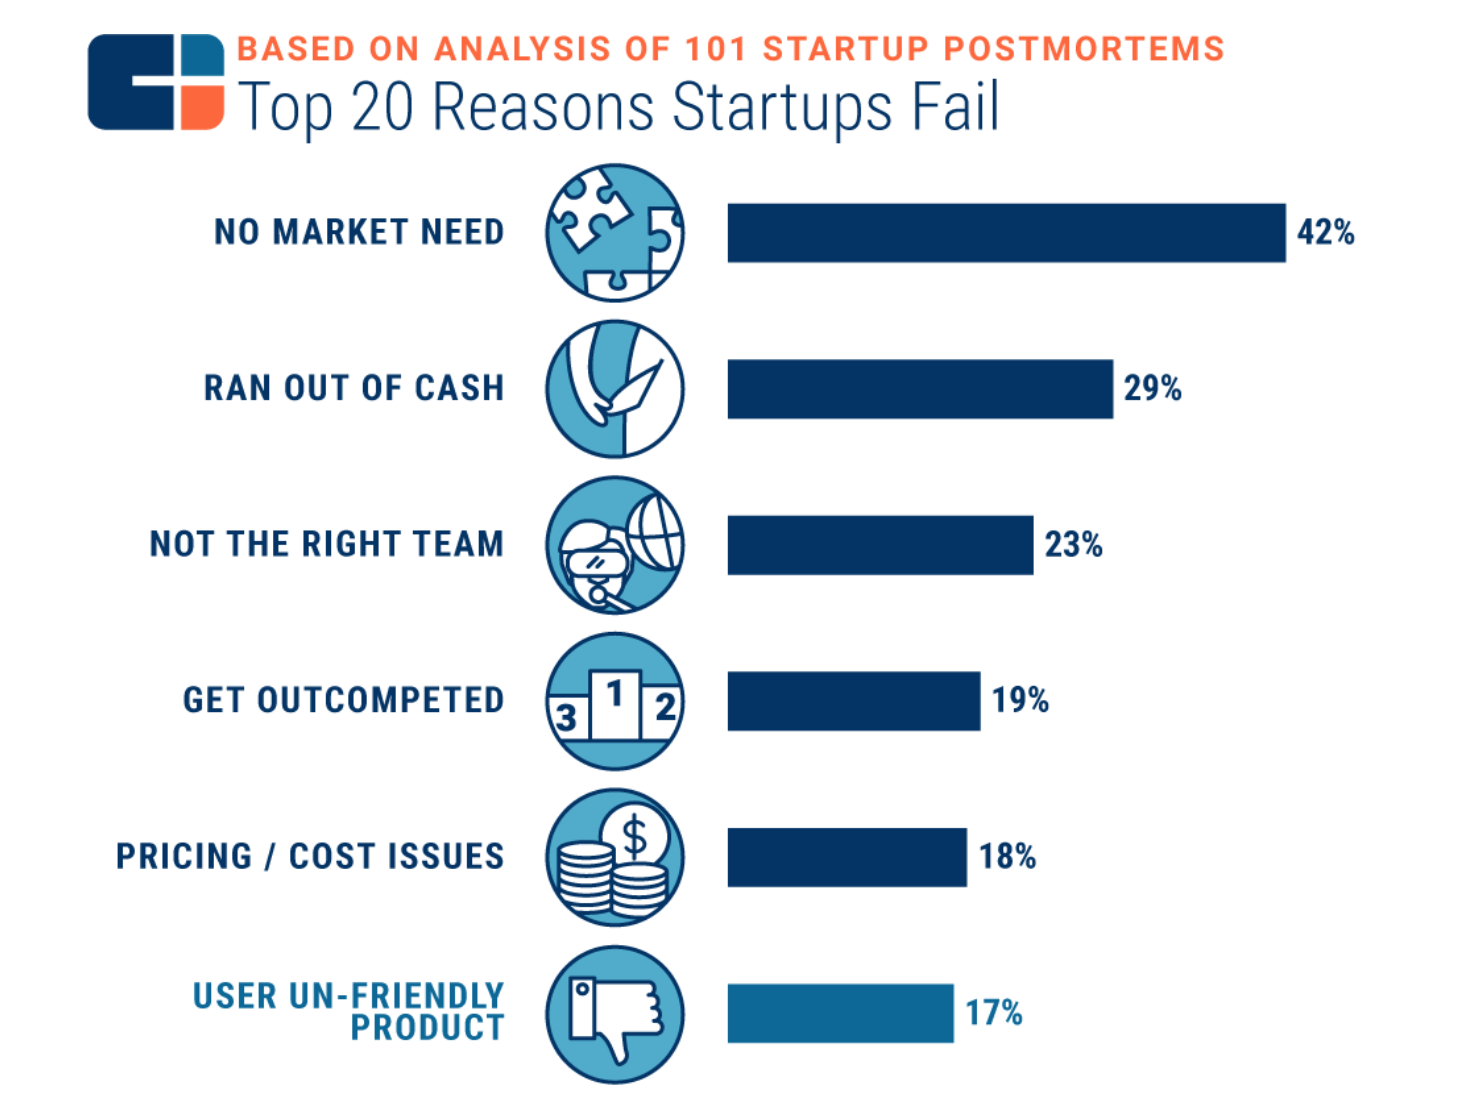 Digital Transformation in Banking - 42% startups fail without market need